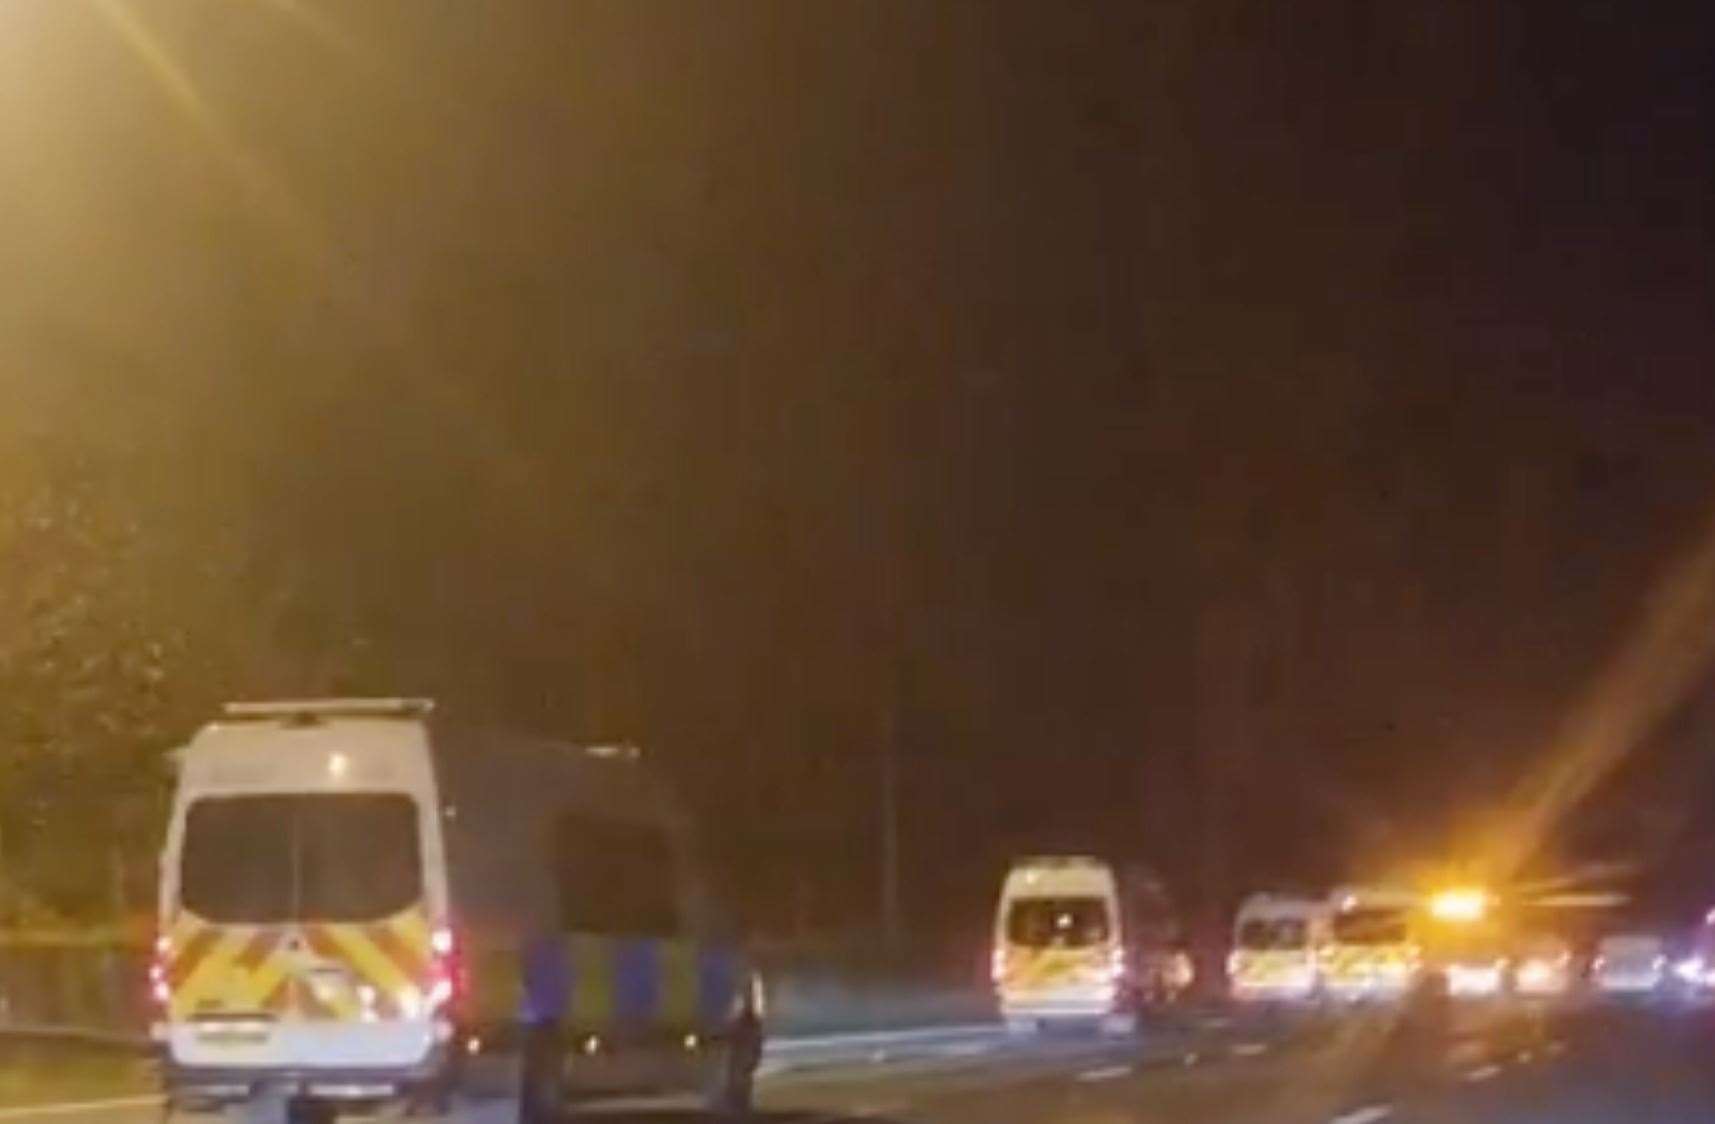 A massive police convoy was spotted along the M25. Photo: Stuart Spires